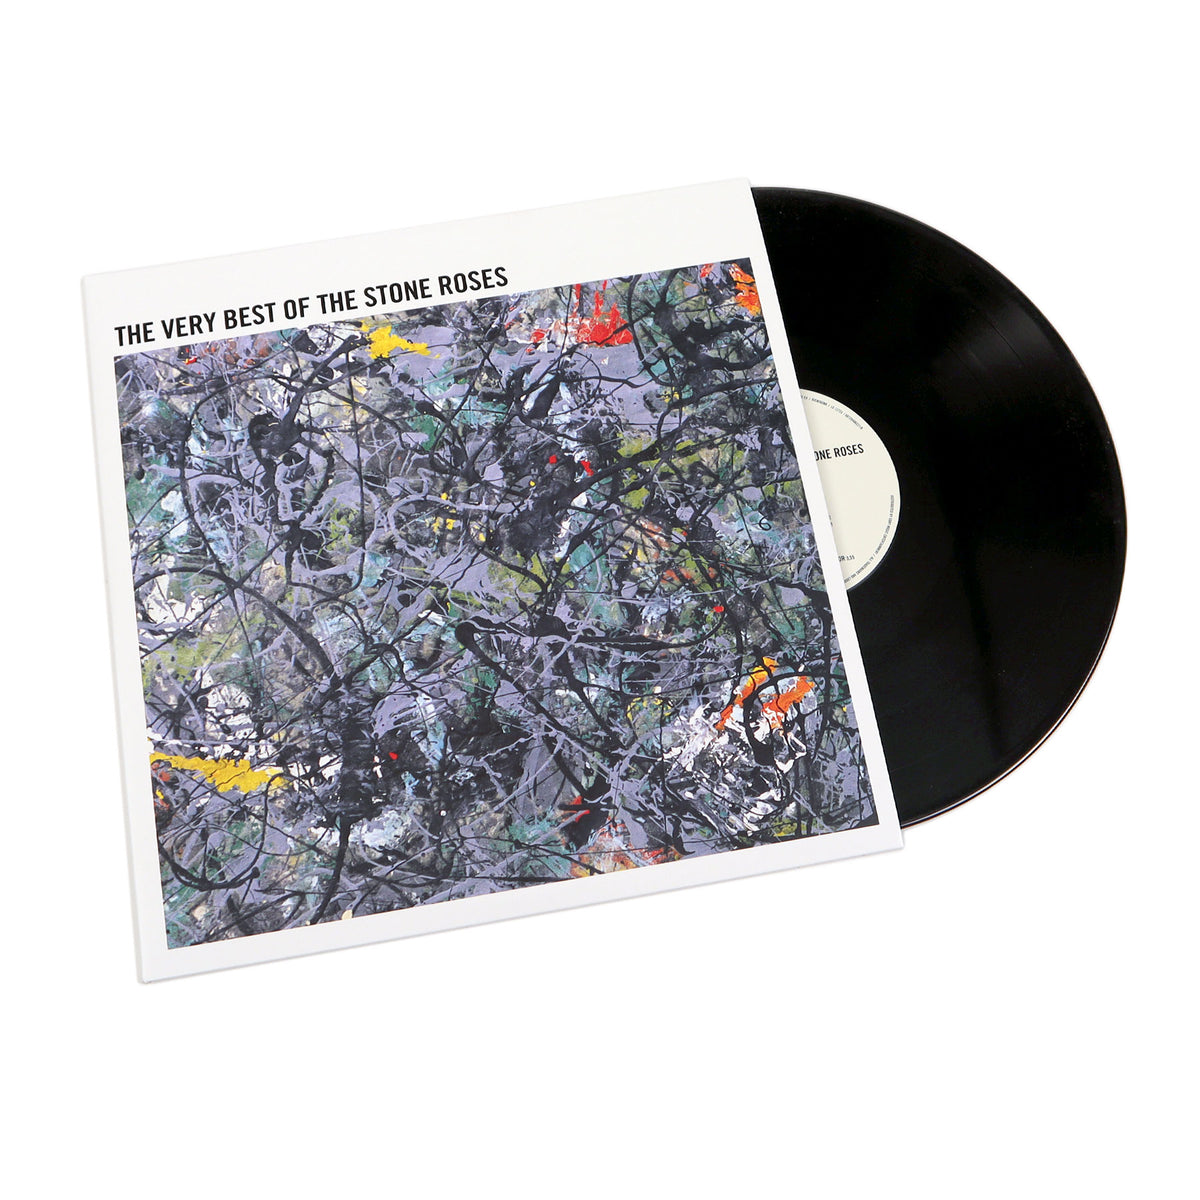 The Stone Roses: Very Best Of The Stone Roses Vinyl 2LP